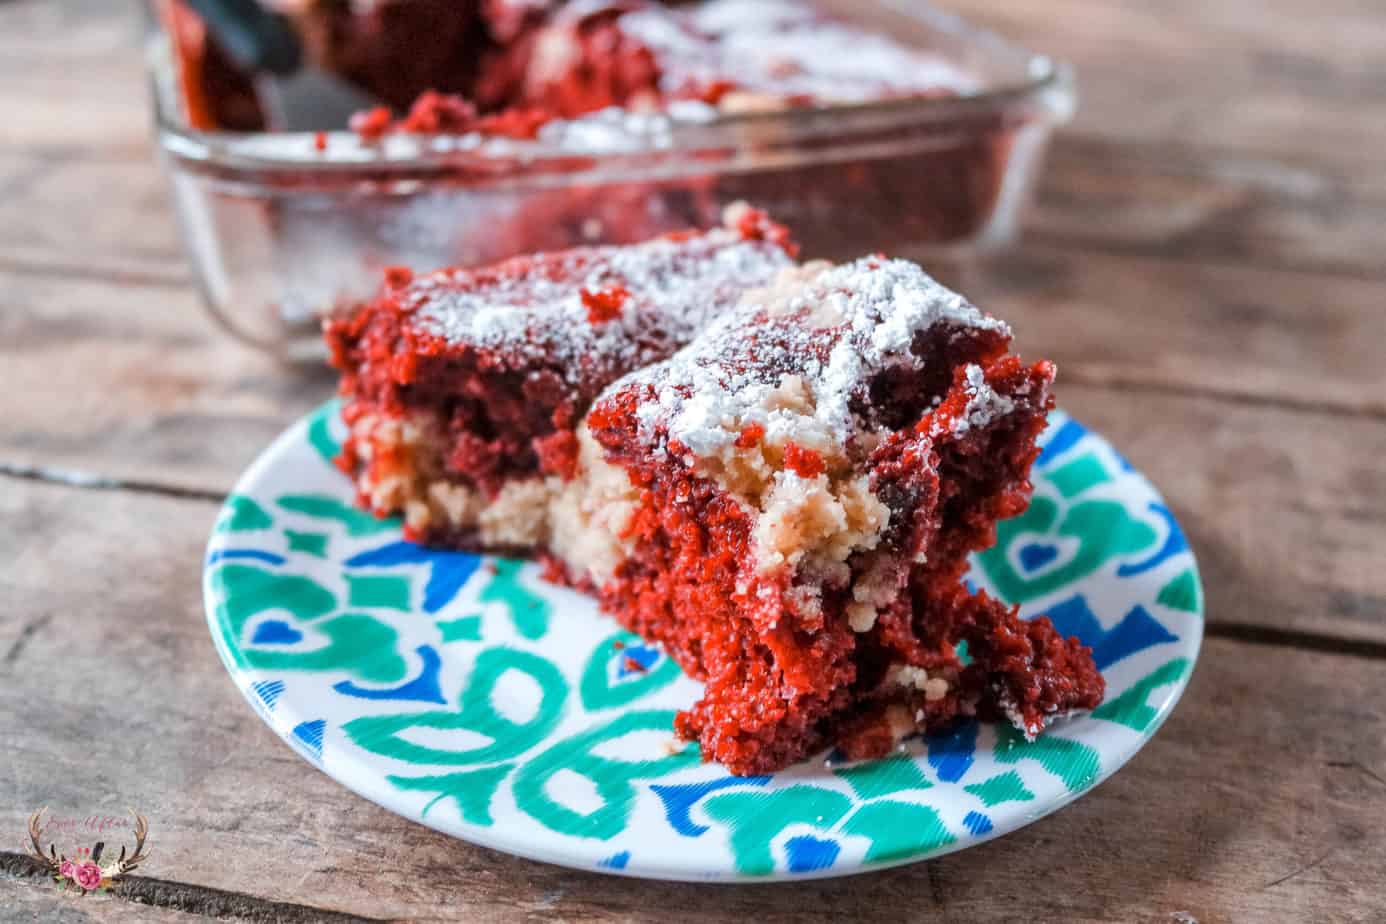 Easy Red Velvet Crumb Cake recipe from a Cake Mix